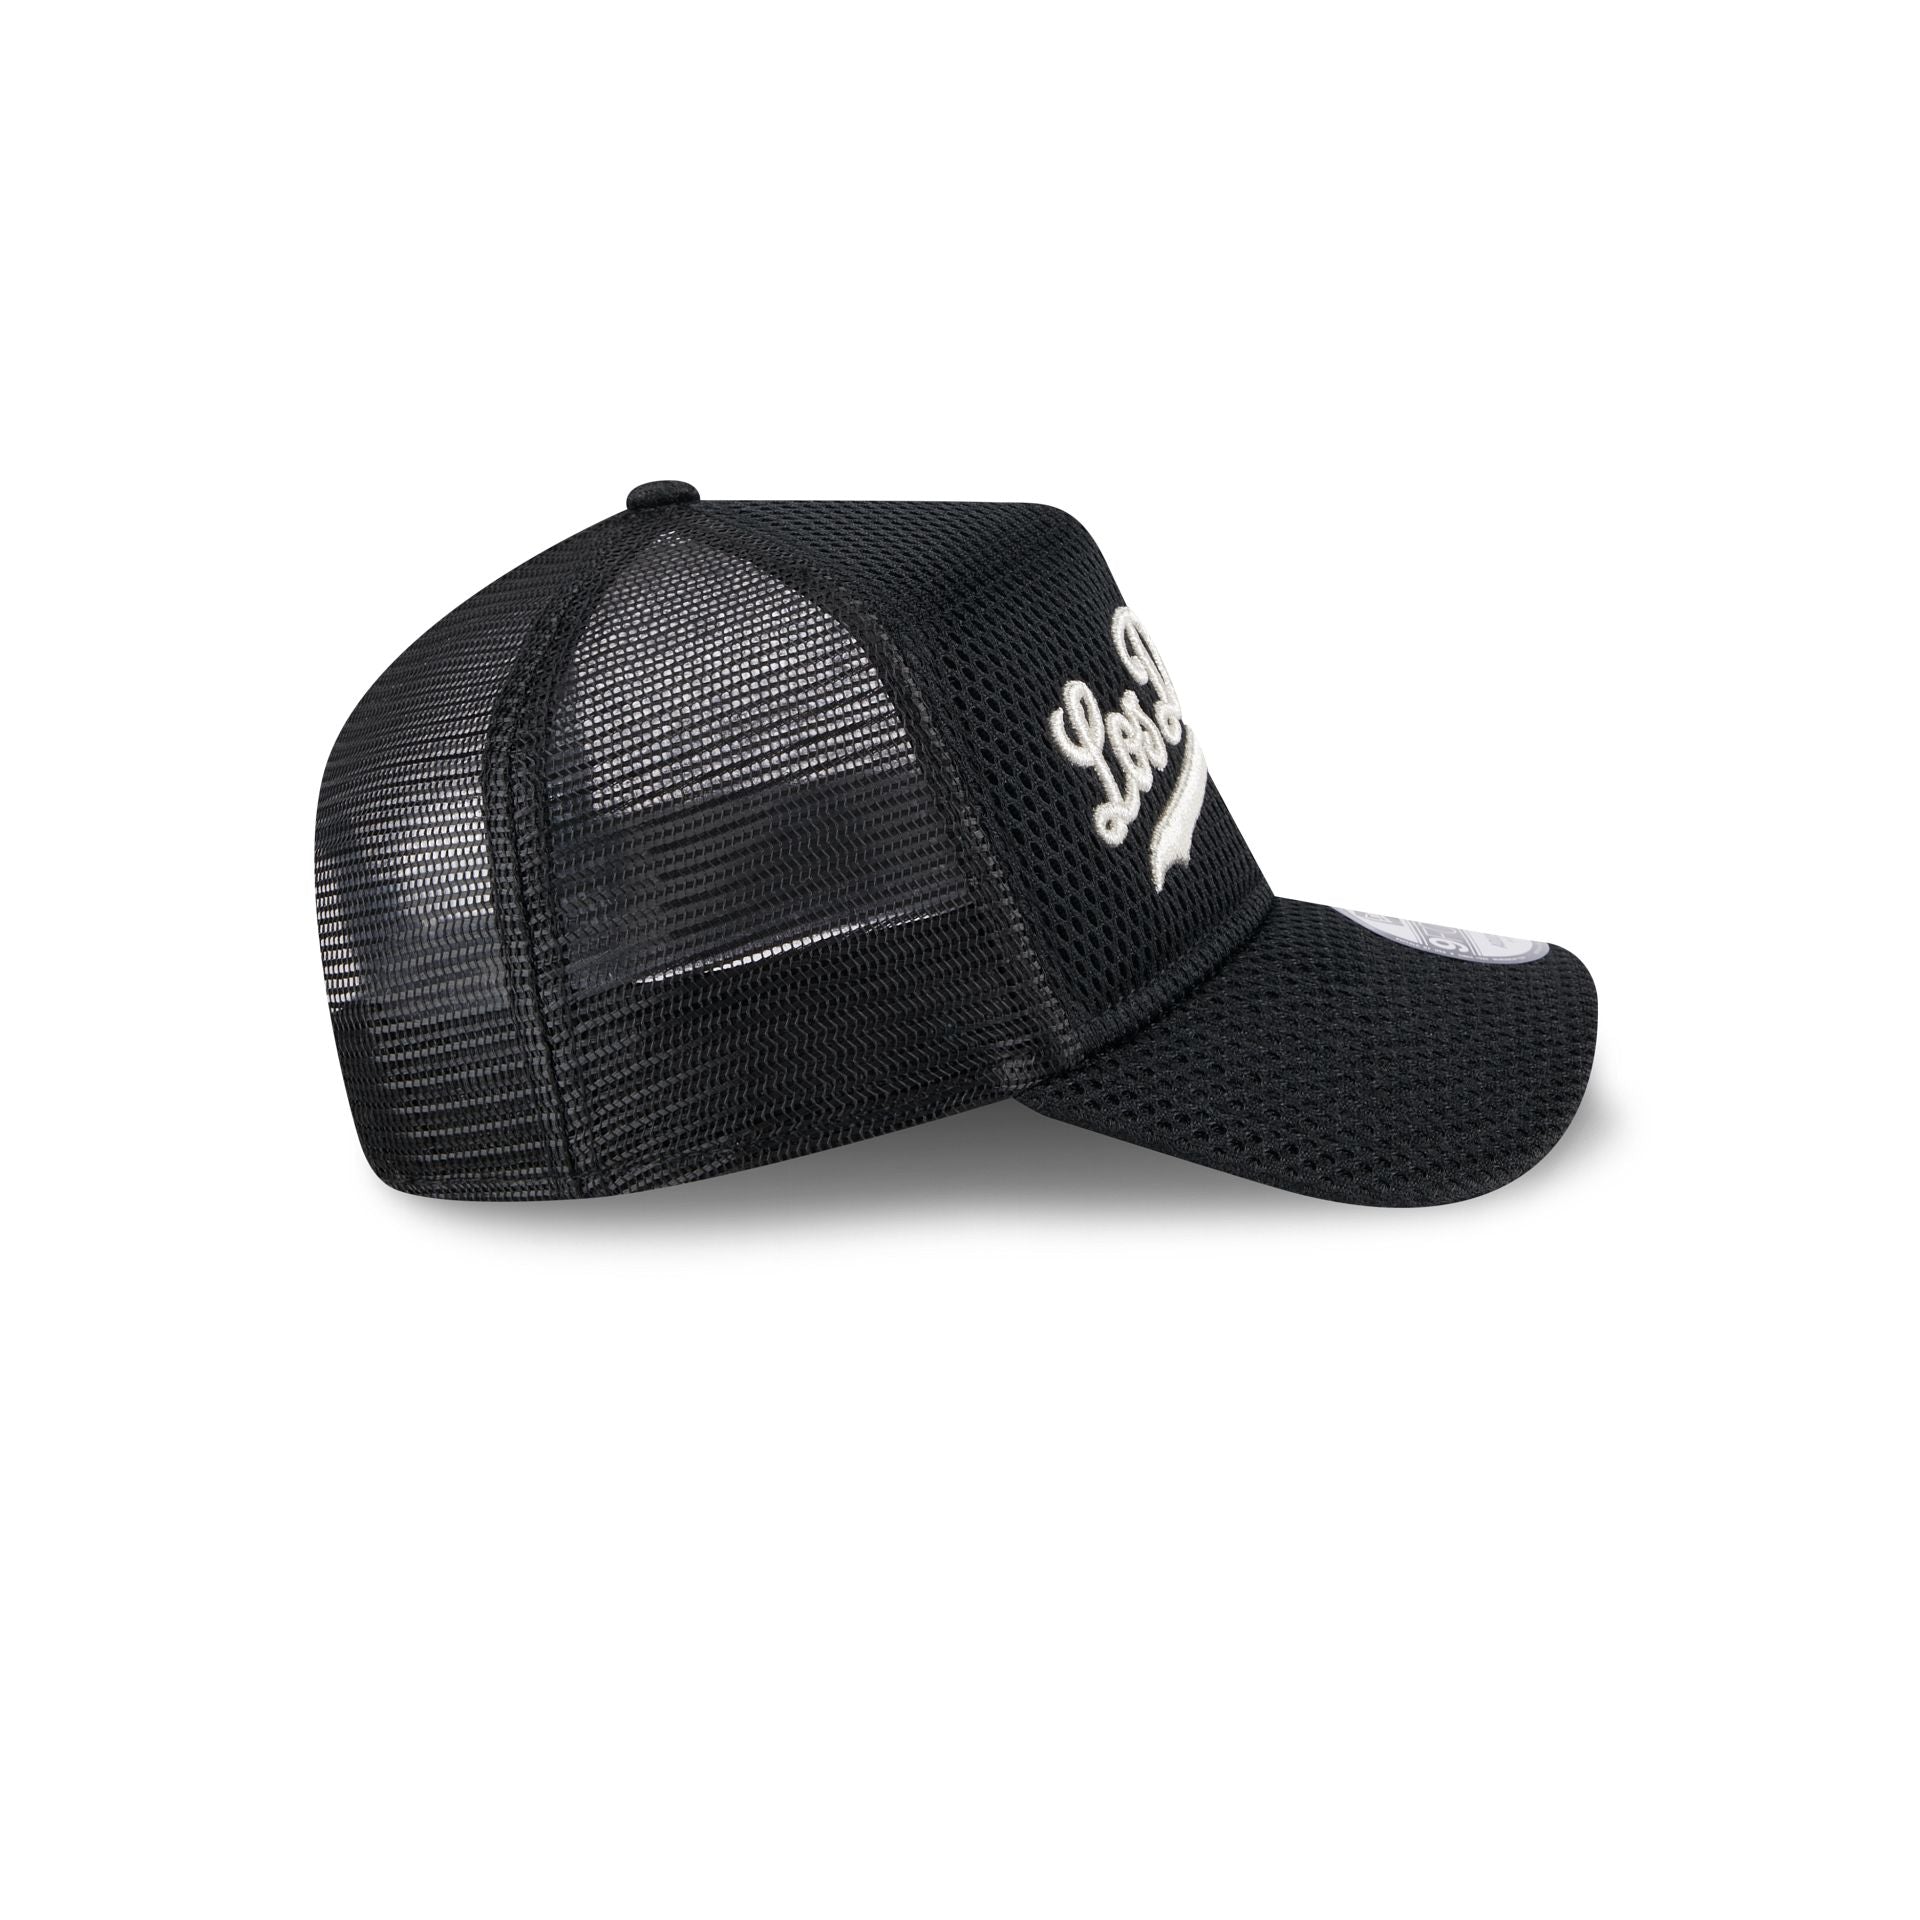 Los Angeles Dodgers City Mesh 9FORTY A-Frame Trucker Hat